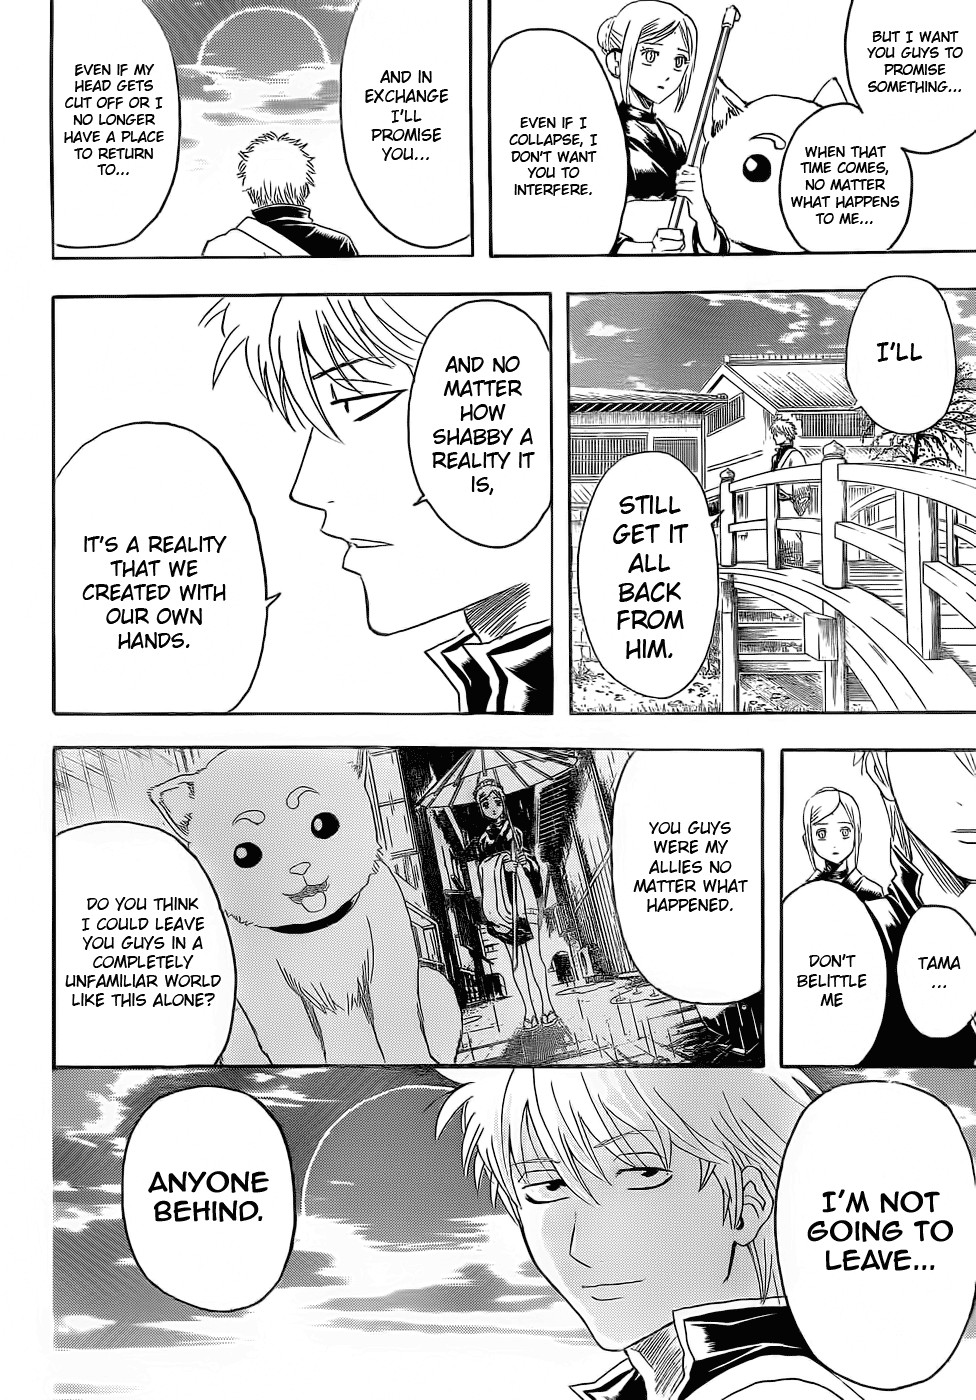 Gintama chapter 375 page 7